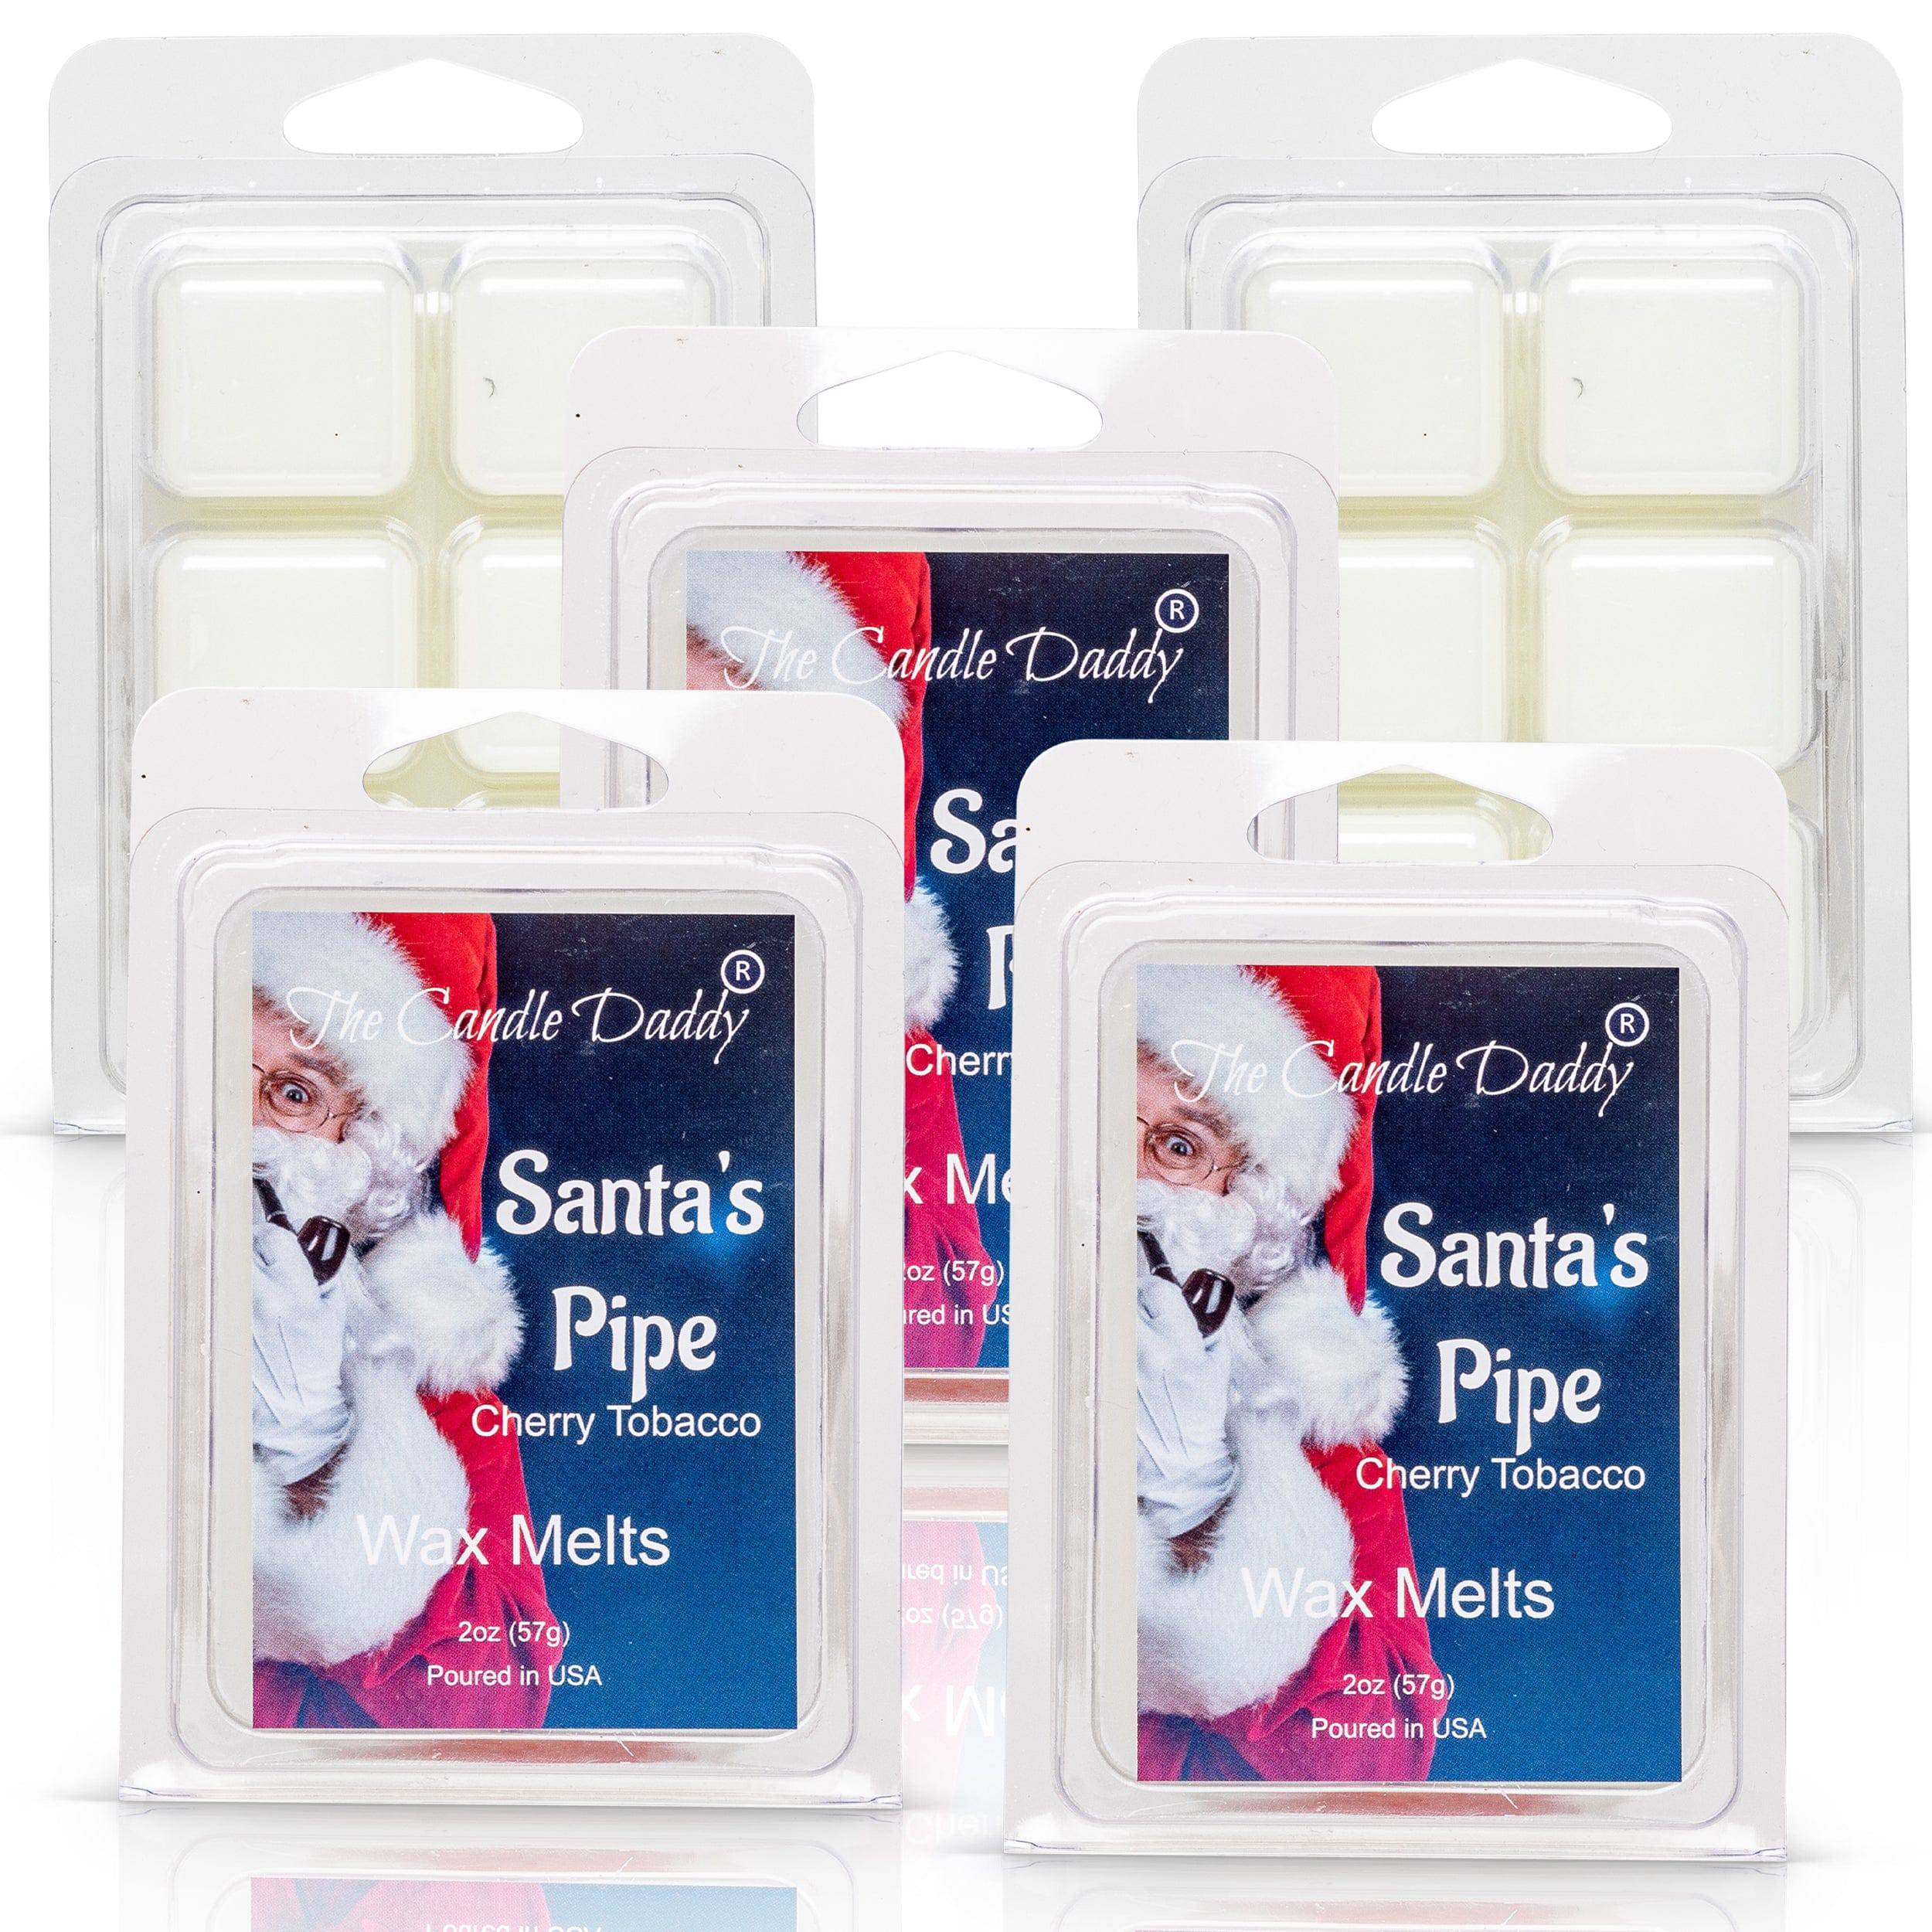 Country Christmas Wax Melts by Candlecopia®, 2 Pack